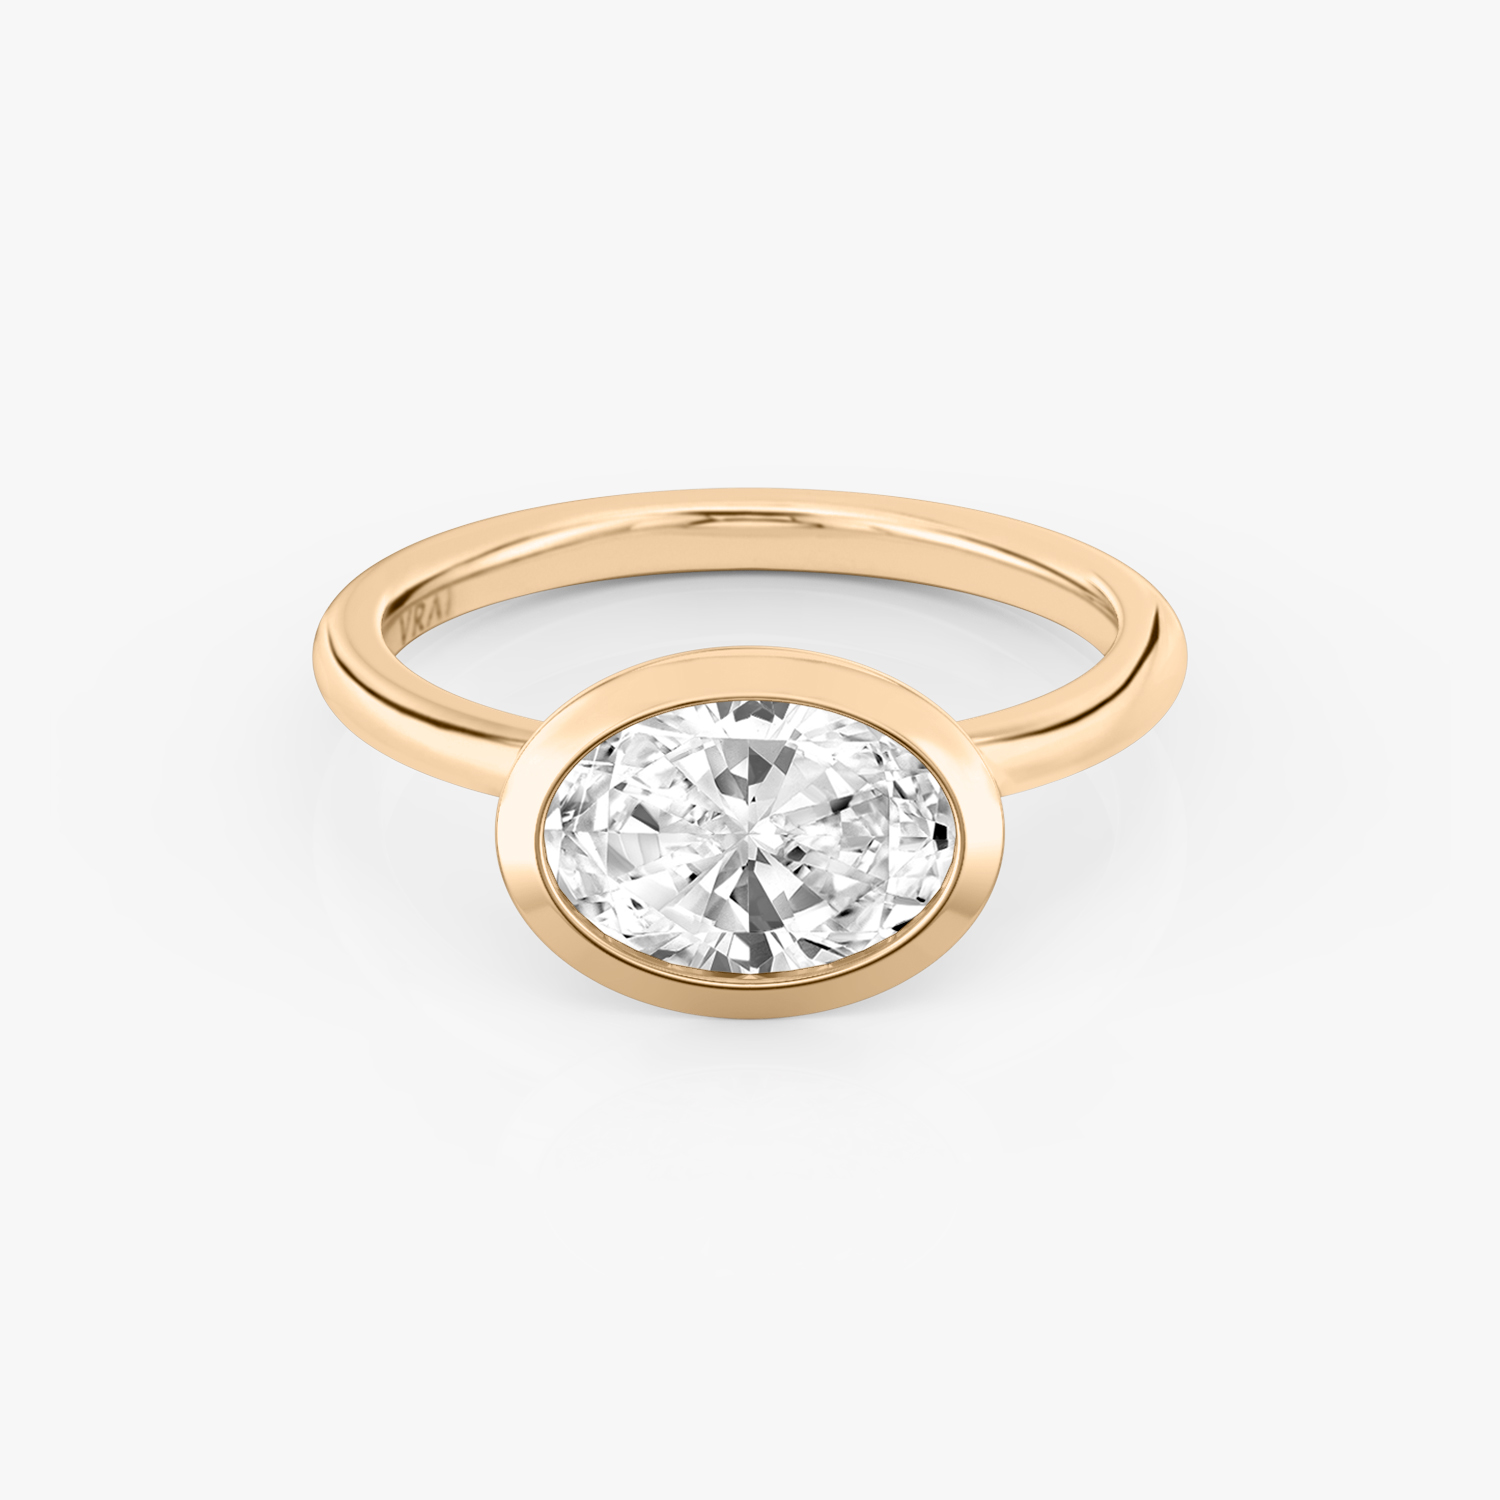 3 Carat Oval Diamond Rings: A Shopping And Styling Guide | Vrai Created  Diamonds